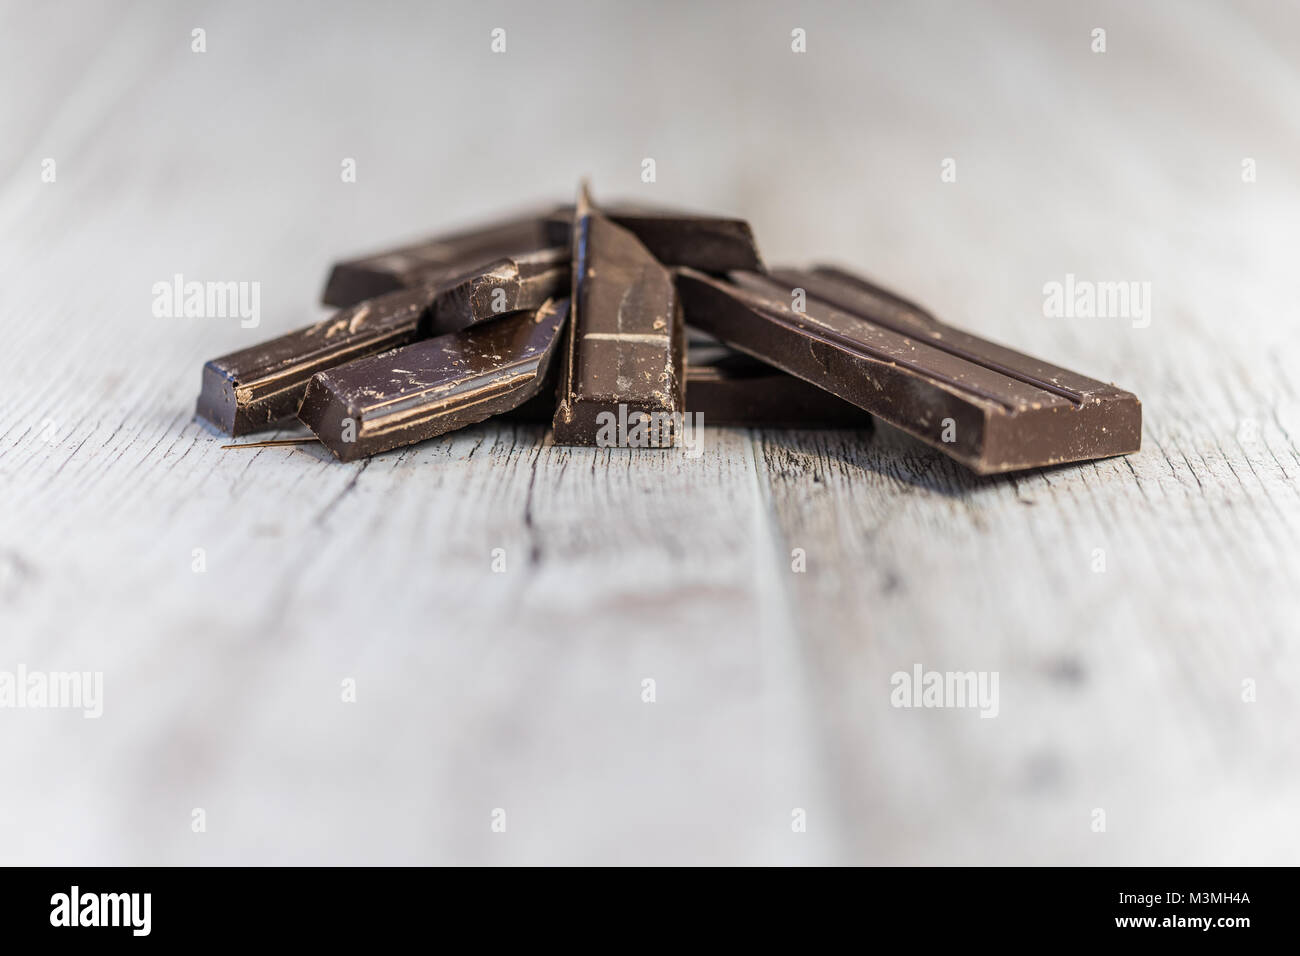 Pieces baking chocolate on wooden desk Stock Photo